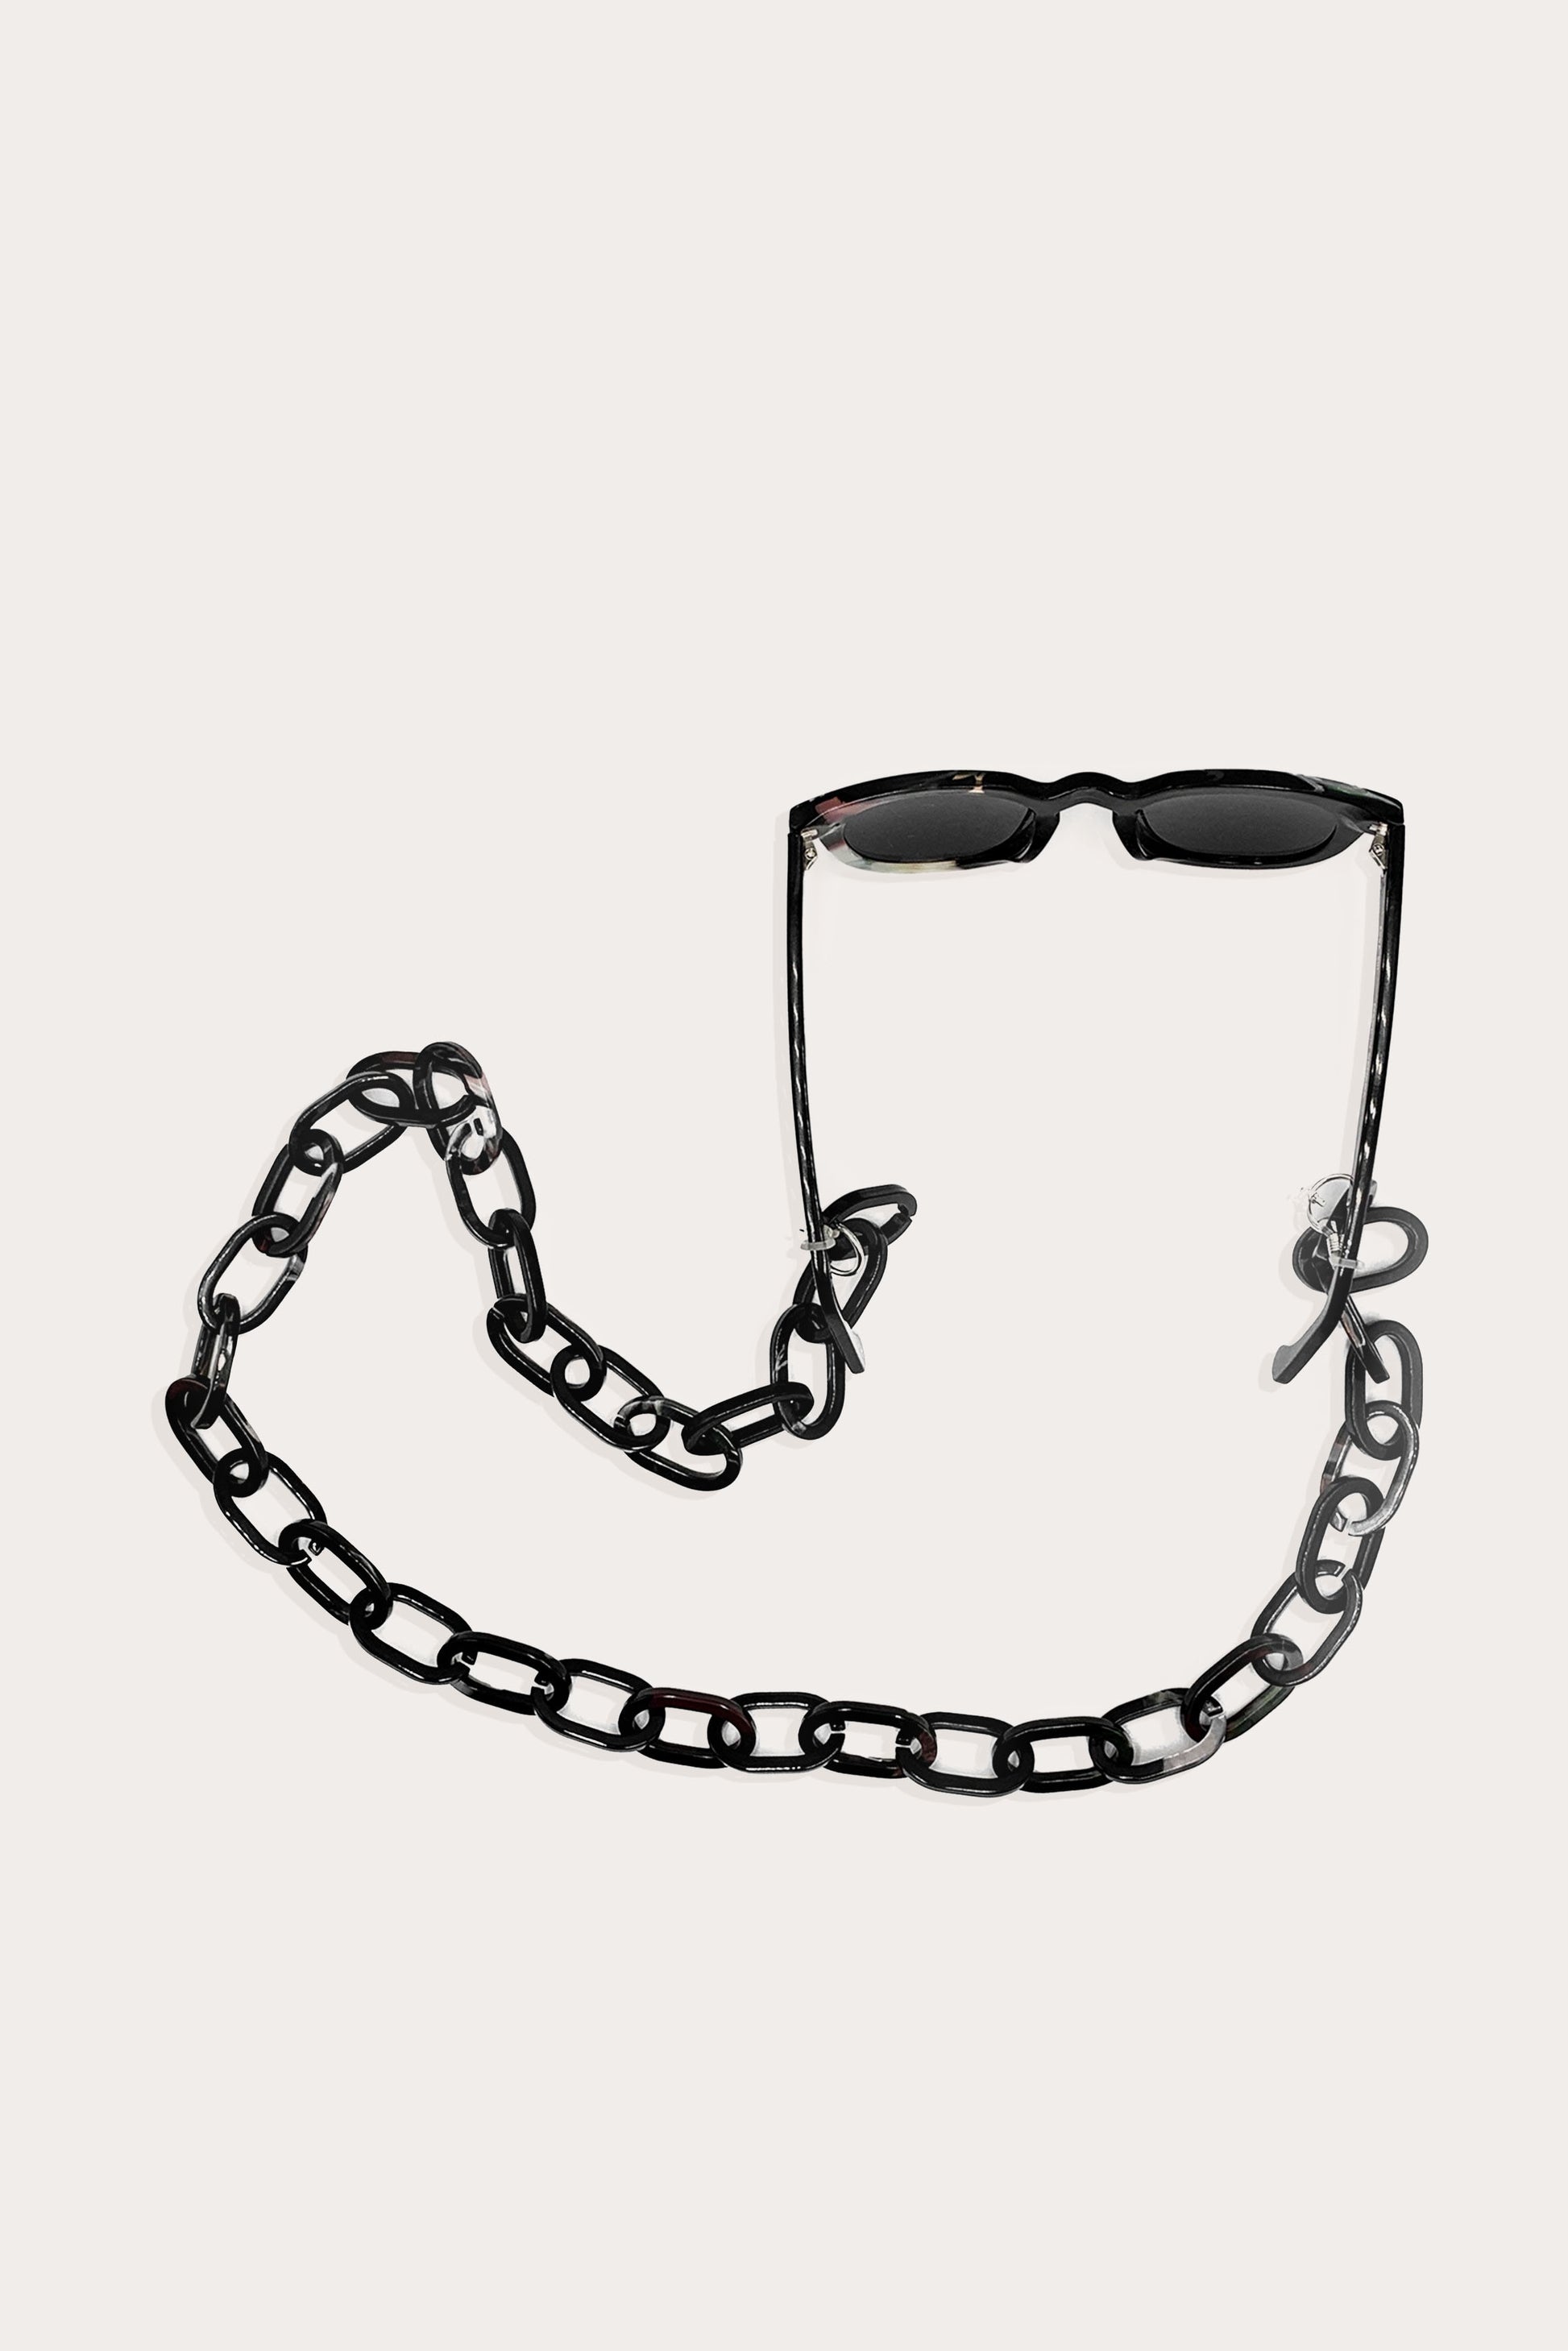 Sunglass Chain, larges black links, easily attaches to sunglasses, every other link is detachable 